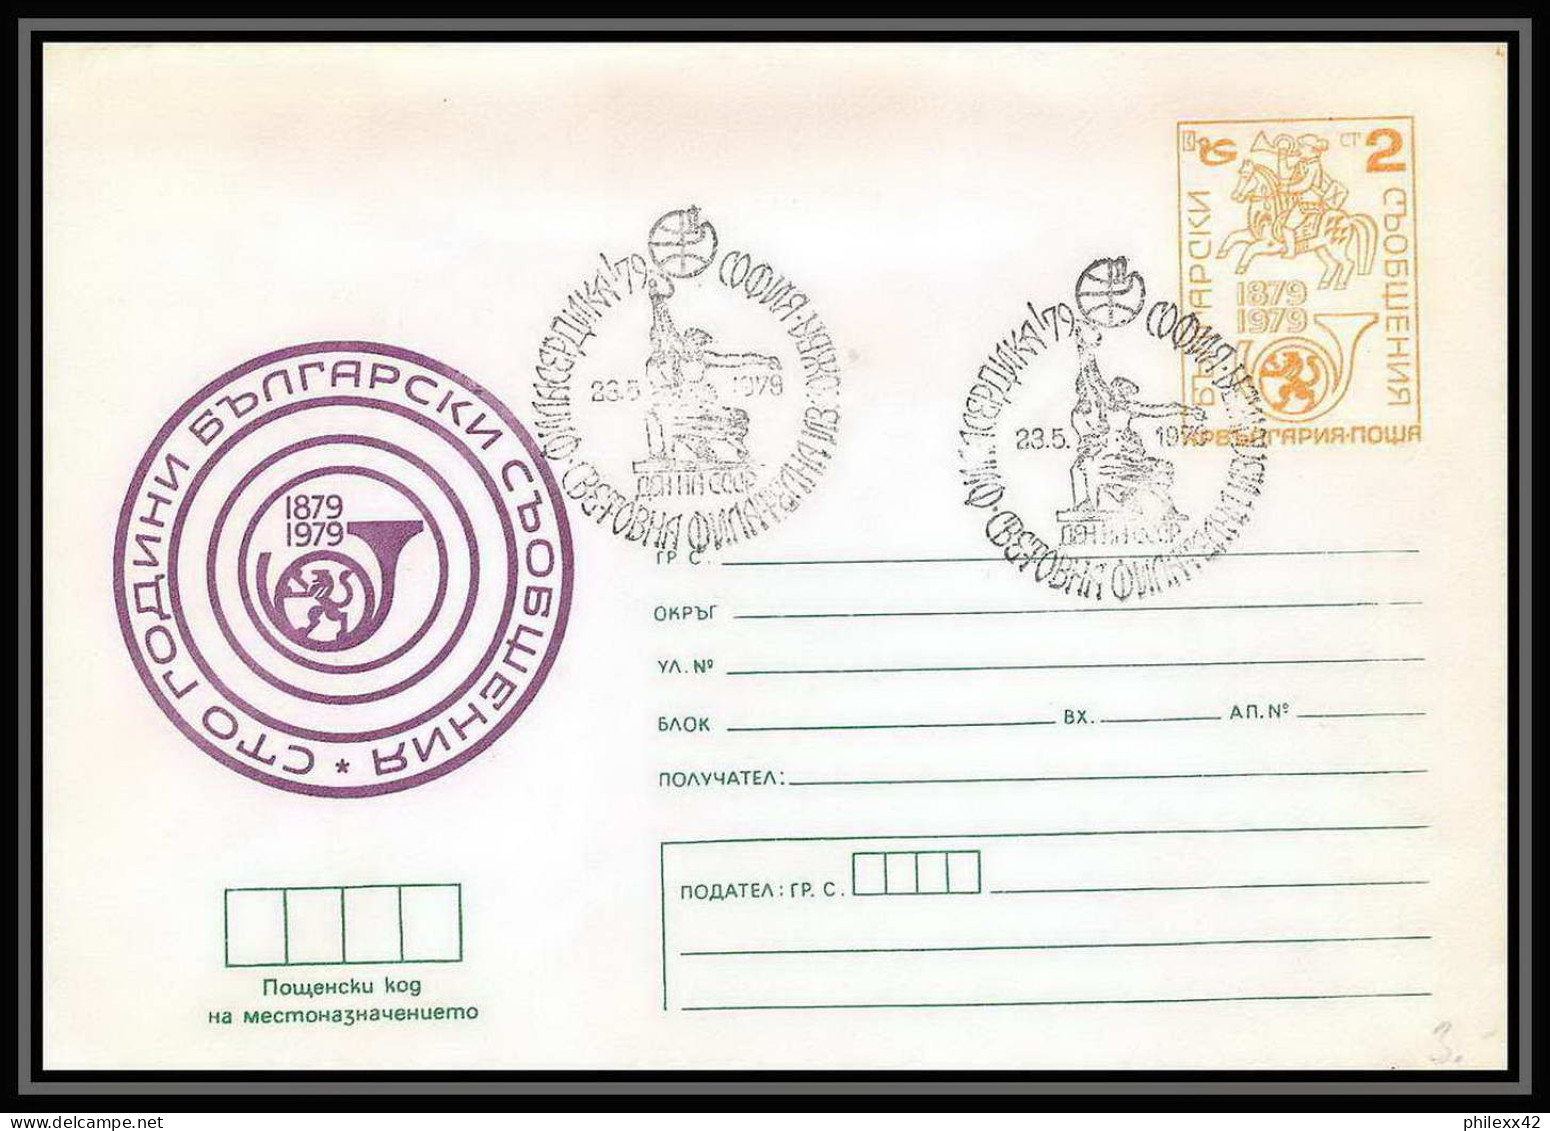 2529/ Bulgarie (Bulgaria) Entier Stationery Enveloppe (cover) 1978 - Briefe